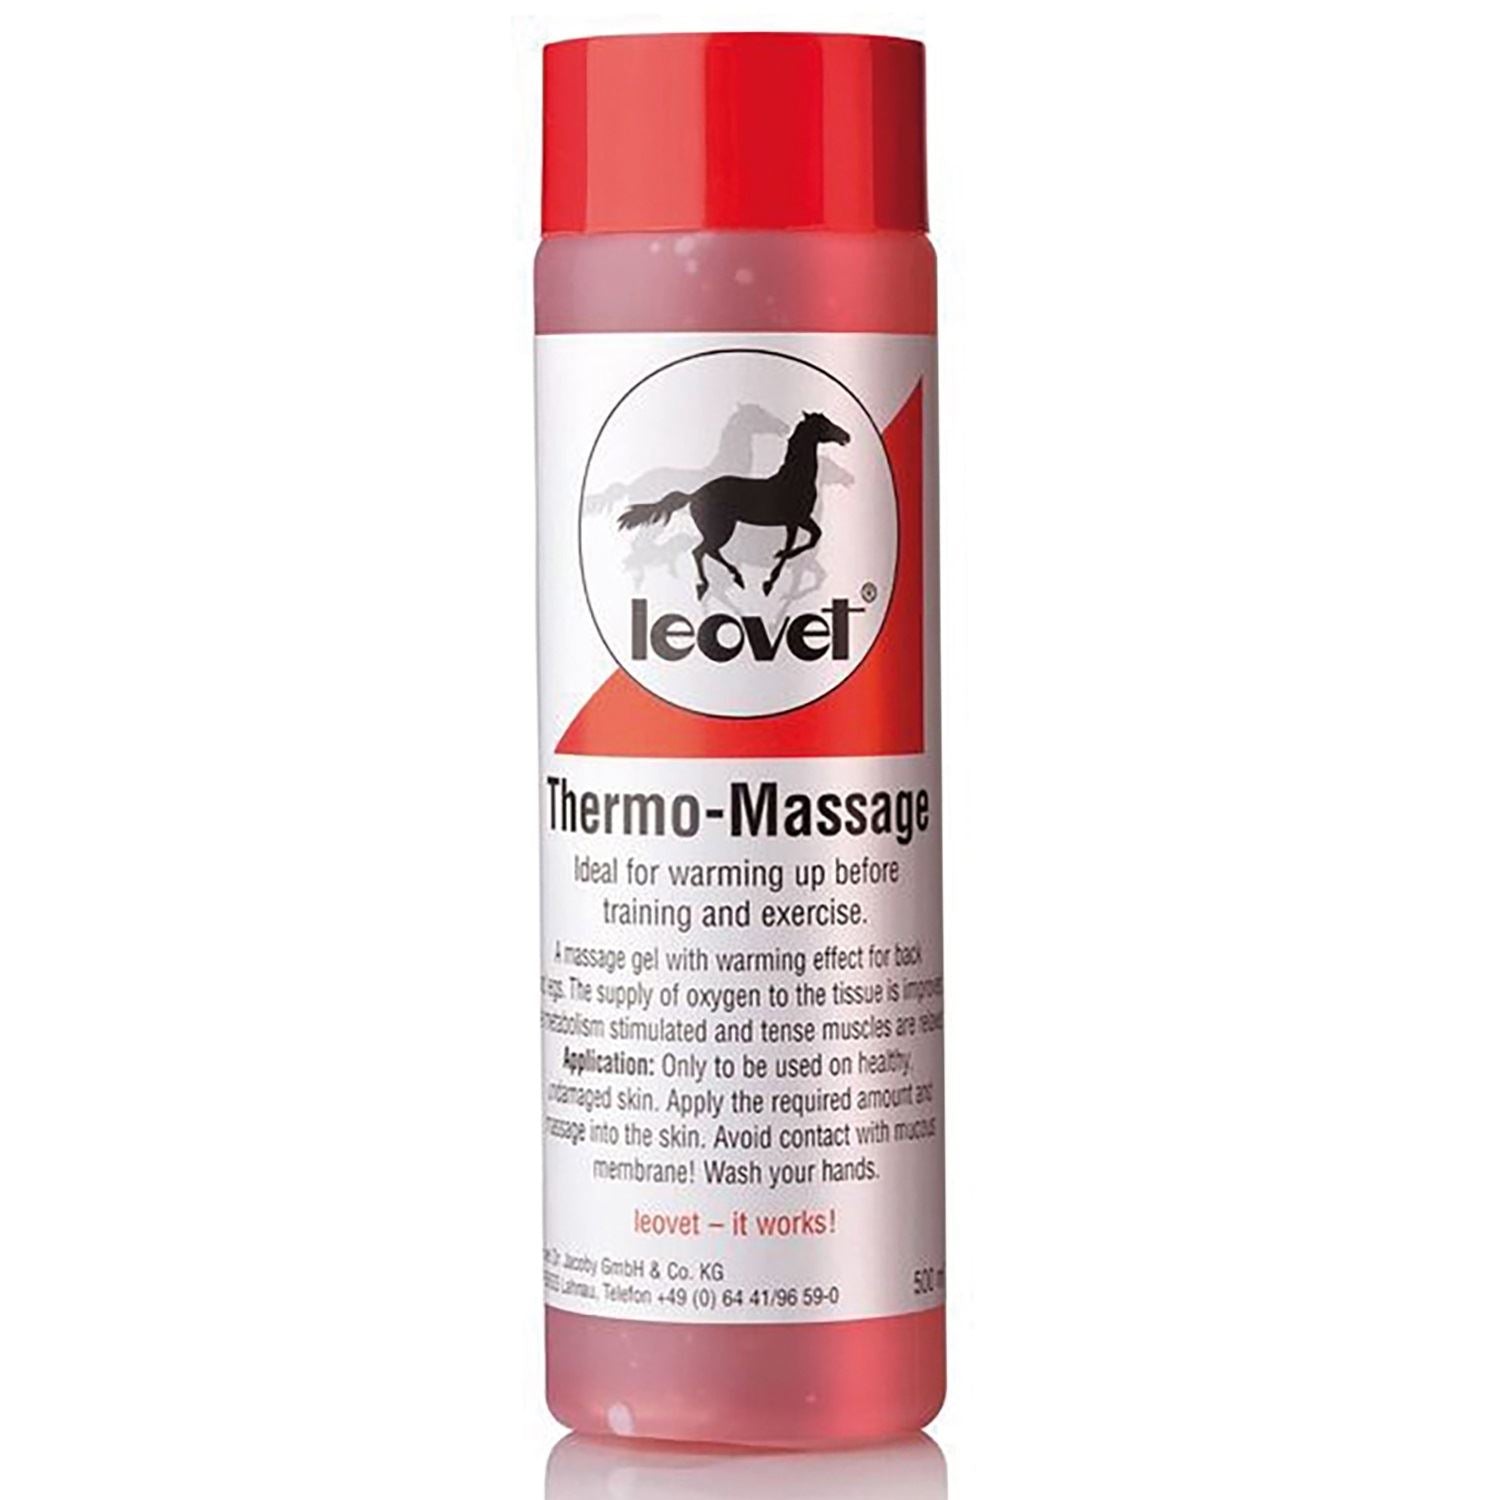 Leovet Thermo-Massage - Just Horse Riders